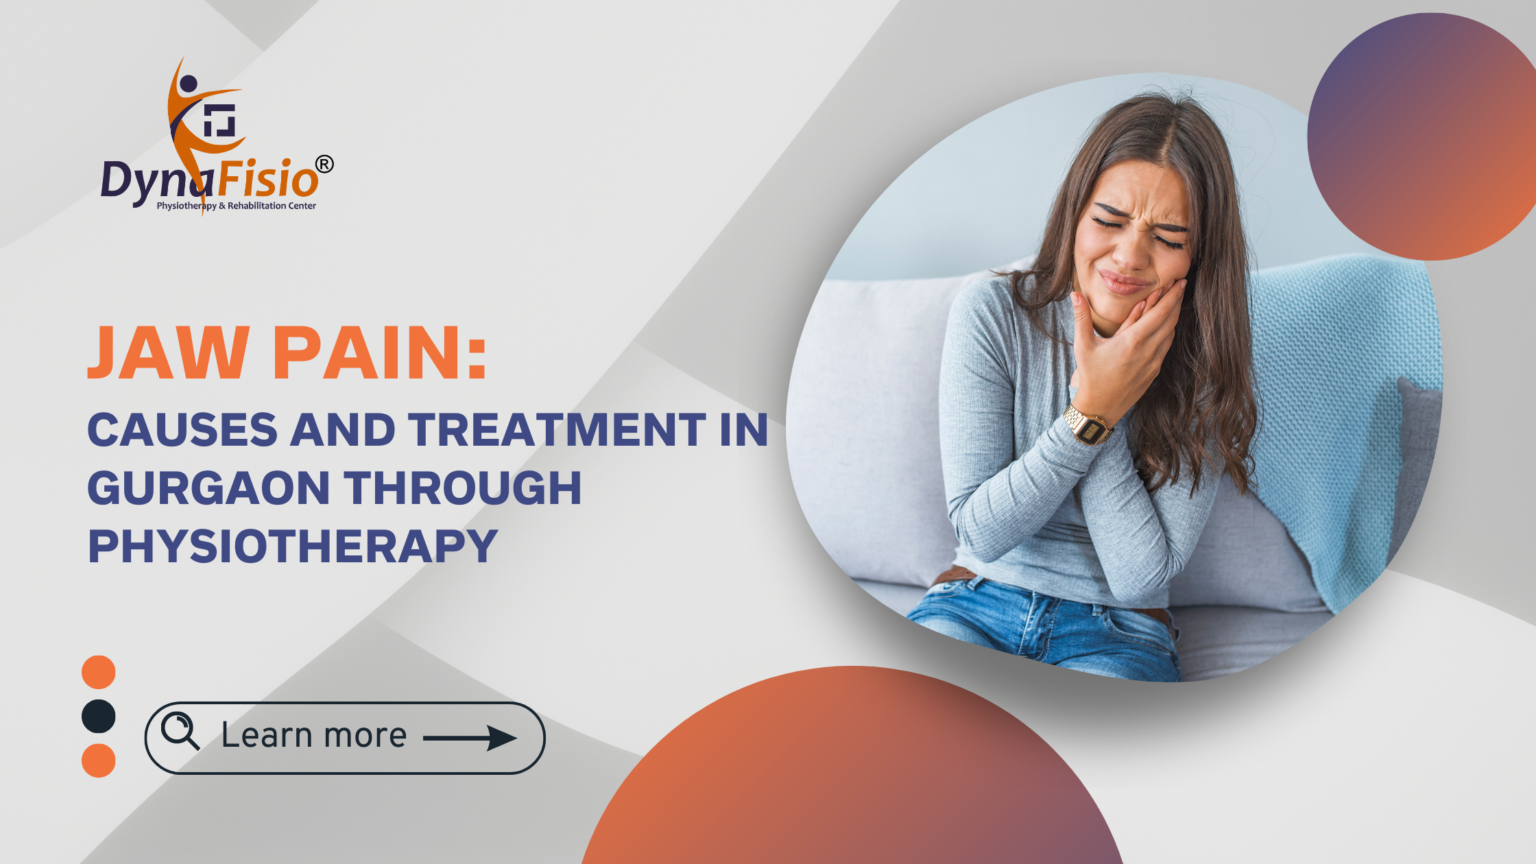 Jaw Pain: Causes And Treatment In Gurgaon Through Physiotherapy